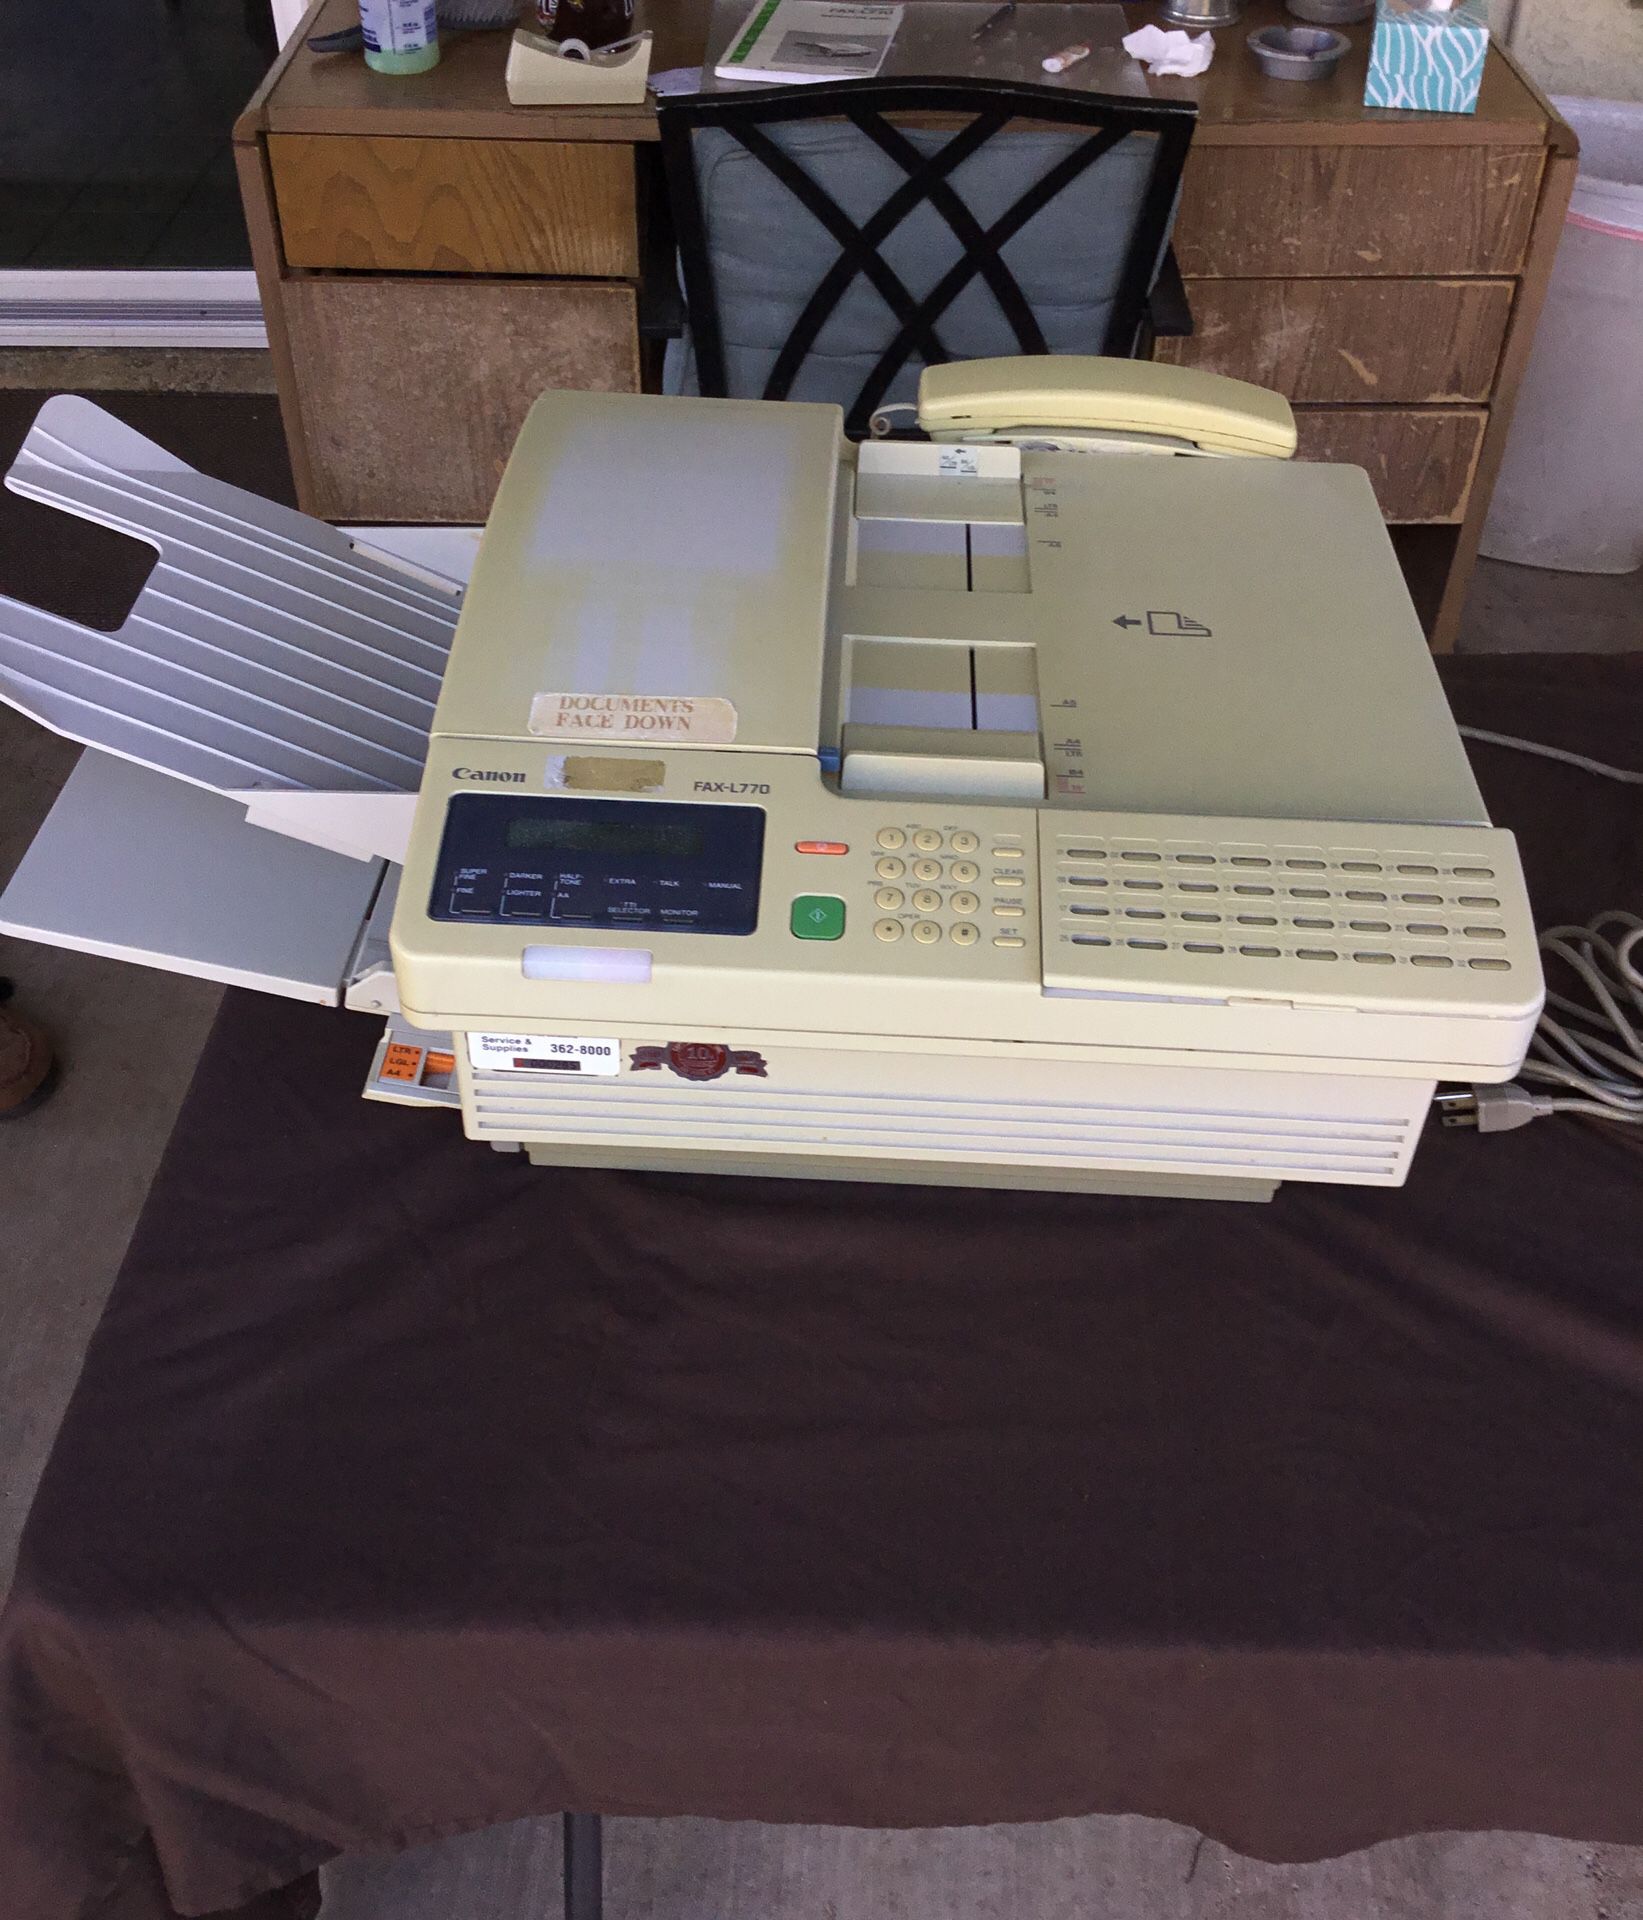 Canon plain-paper Fax-L770 - Works Great! Retails for $2,980.00